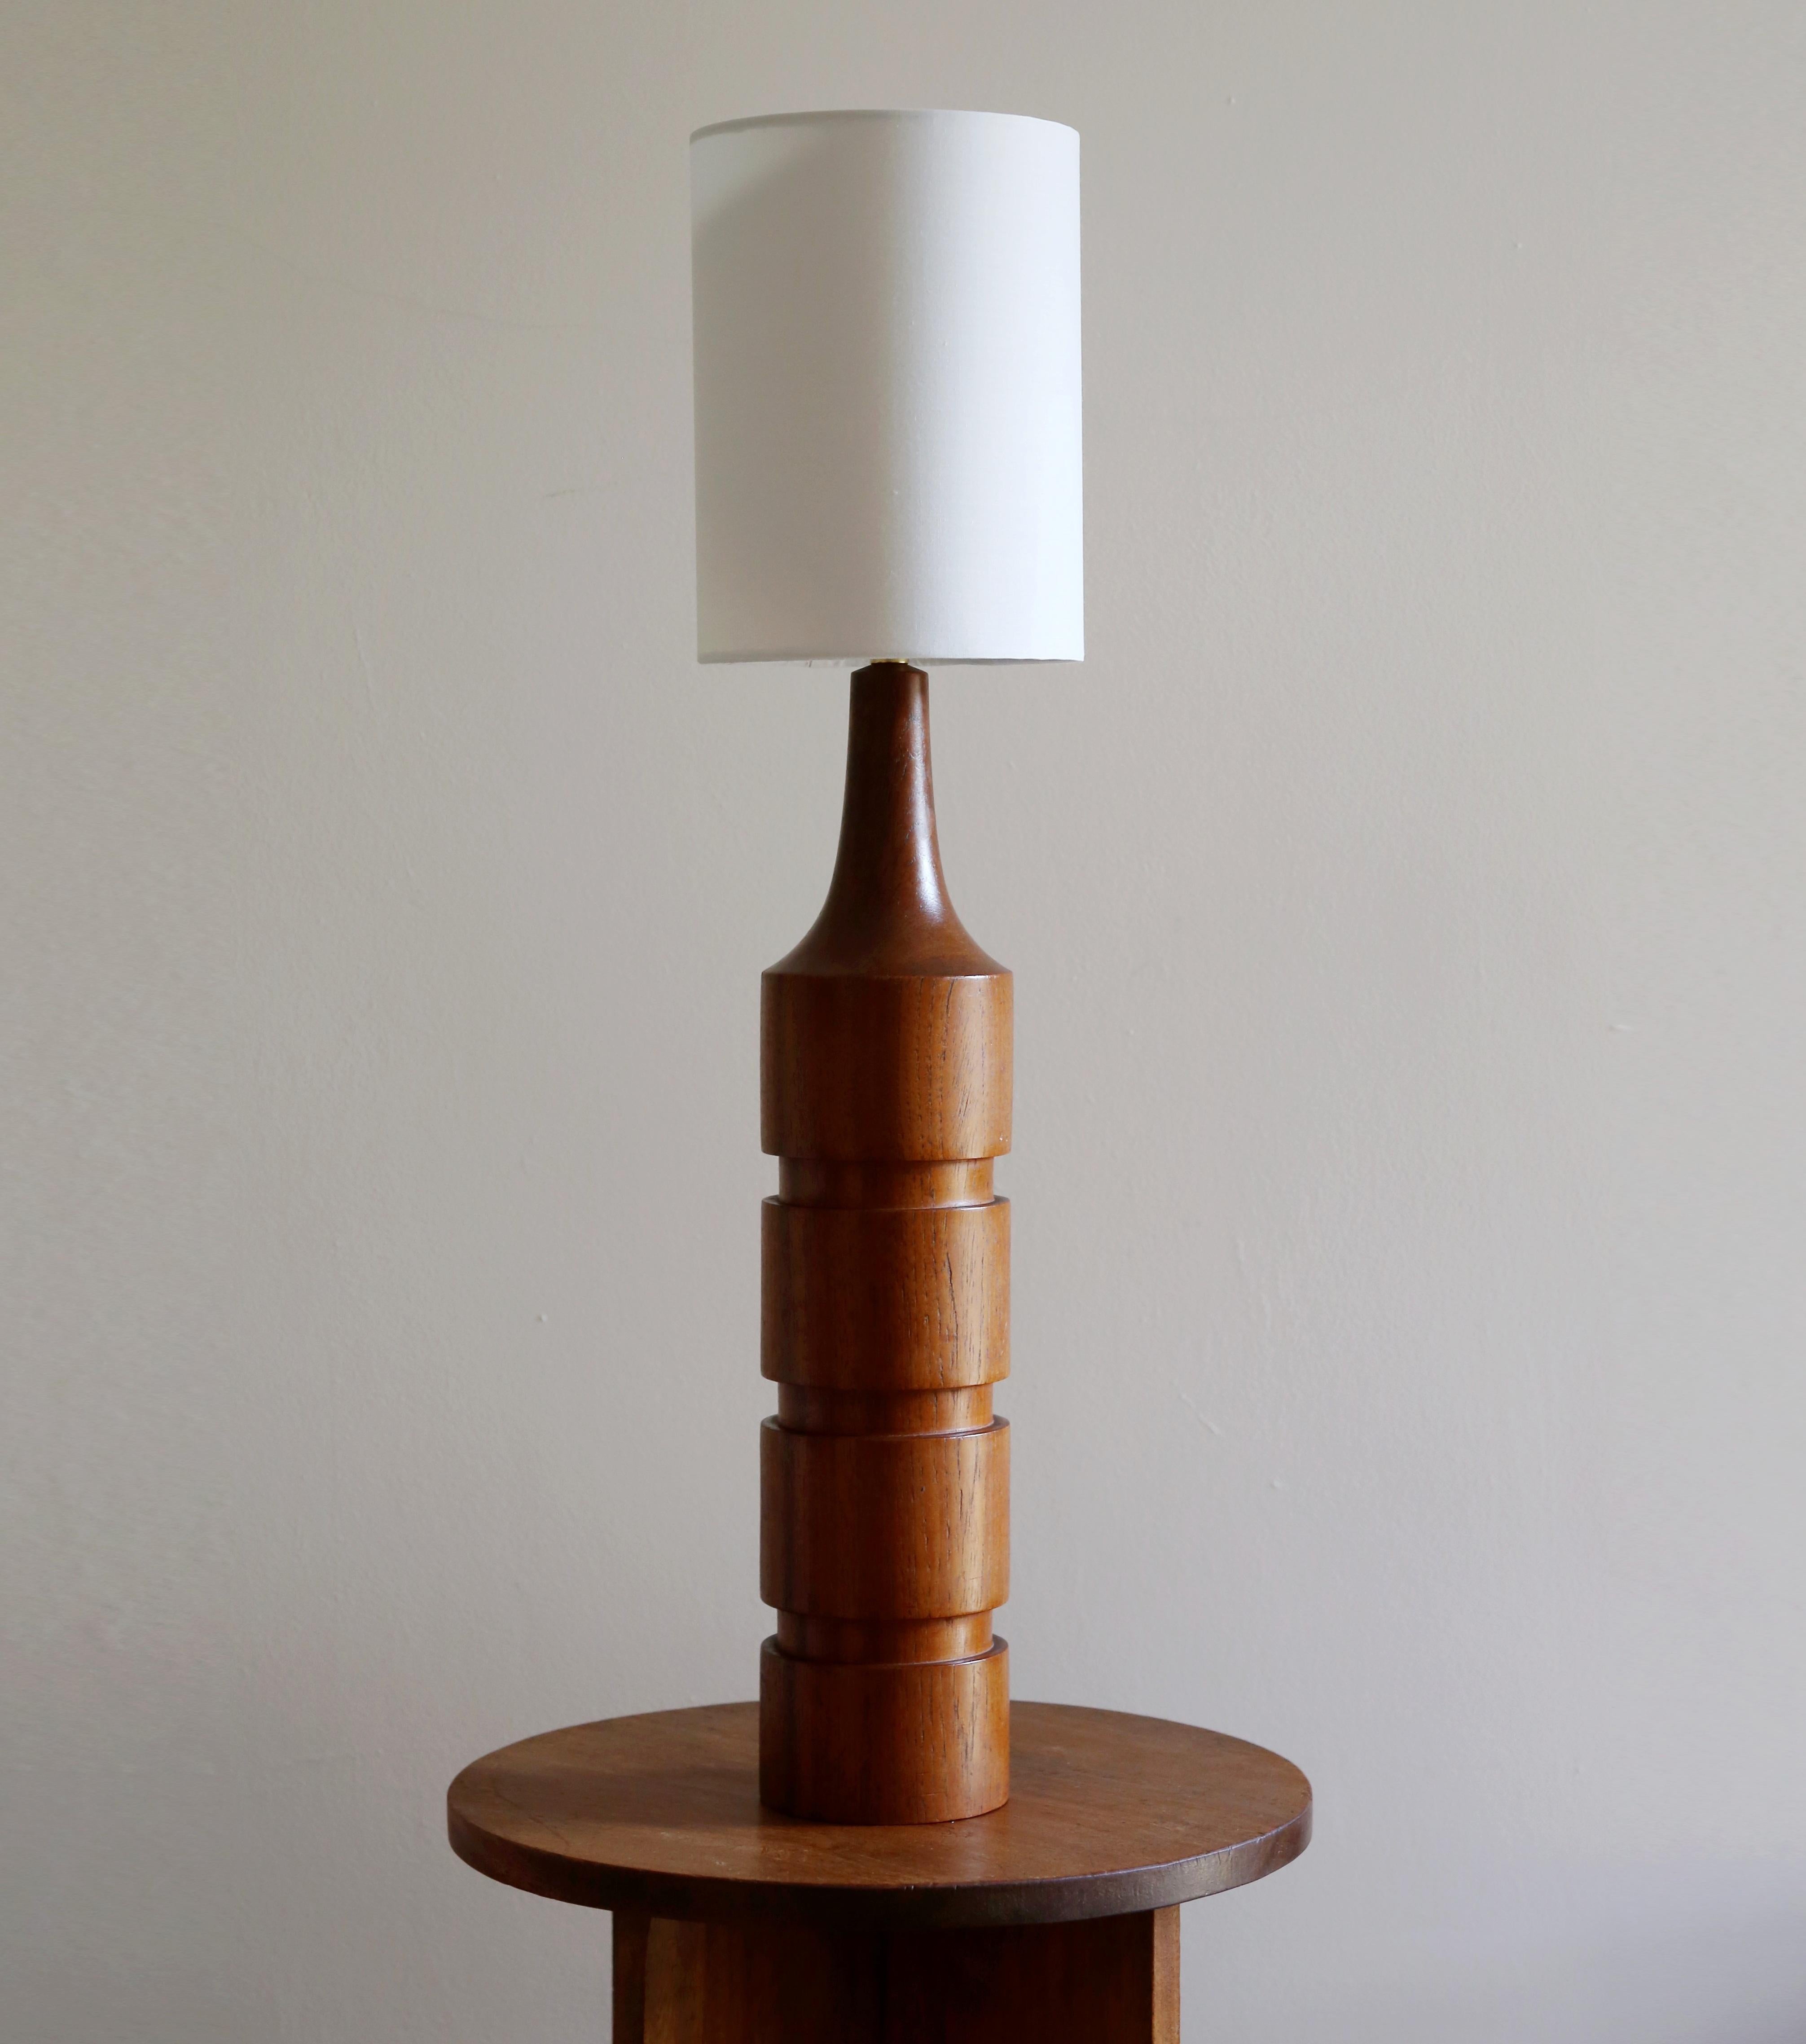 Beautiful tall ringed Mid Century Danish teak lamp has been fully cleaned, restored and rewired.  A lovely example of Scandinavian minimalism, this lamp would fit in beautifully with a Mid Century interior
Likely dating back to the mid 1960s, the